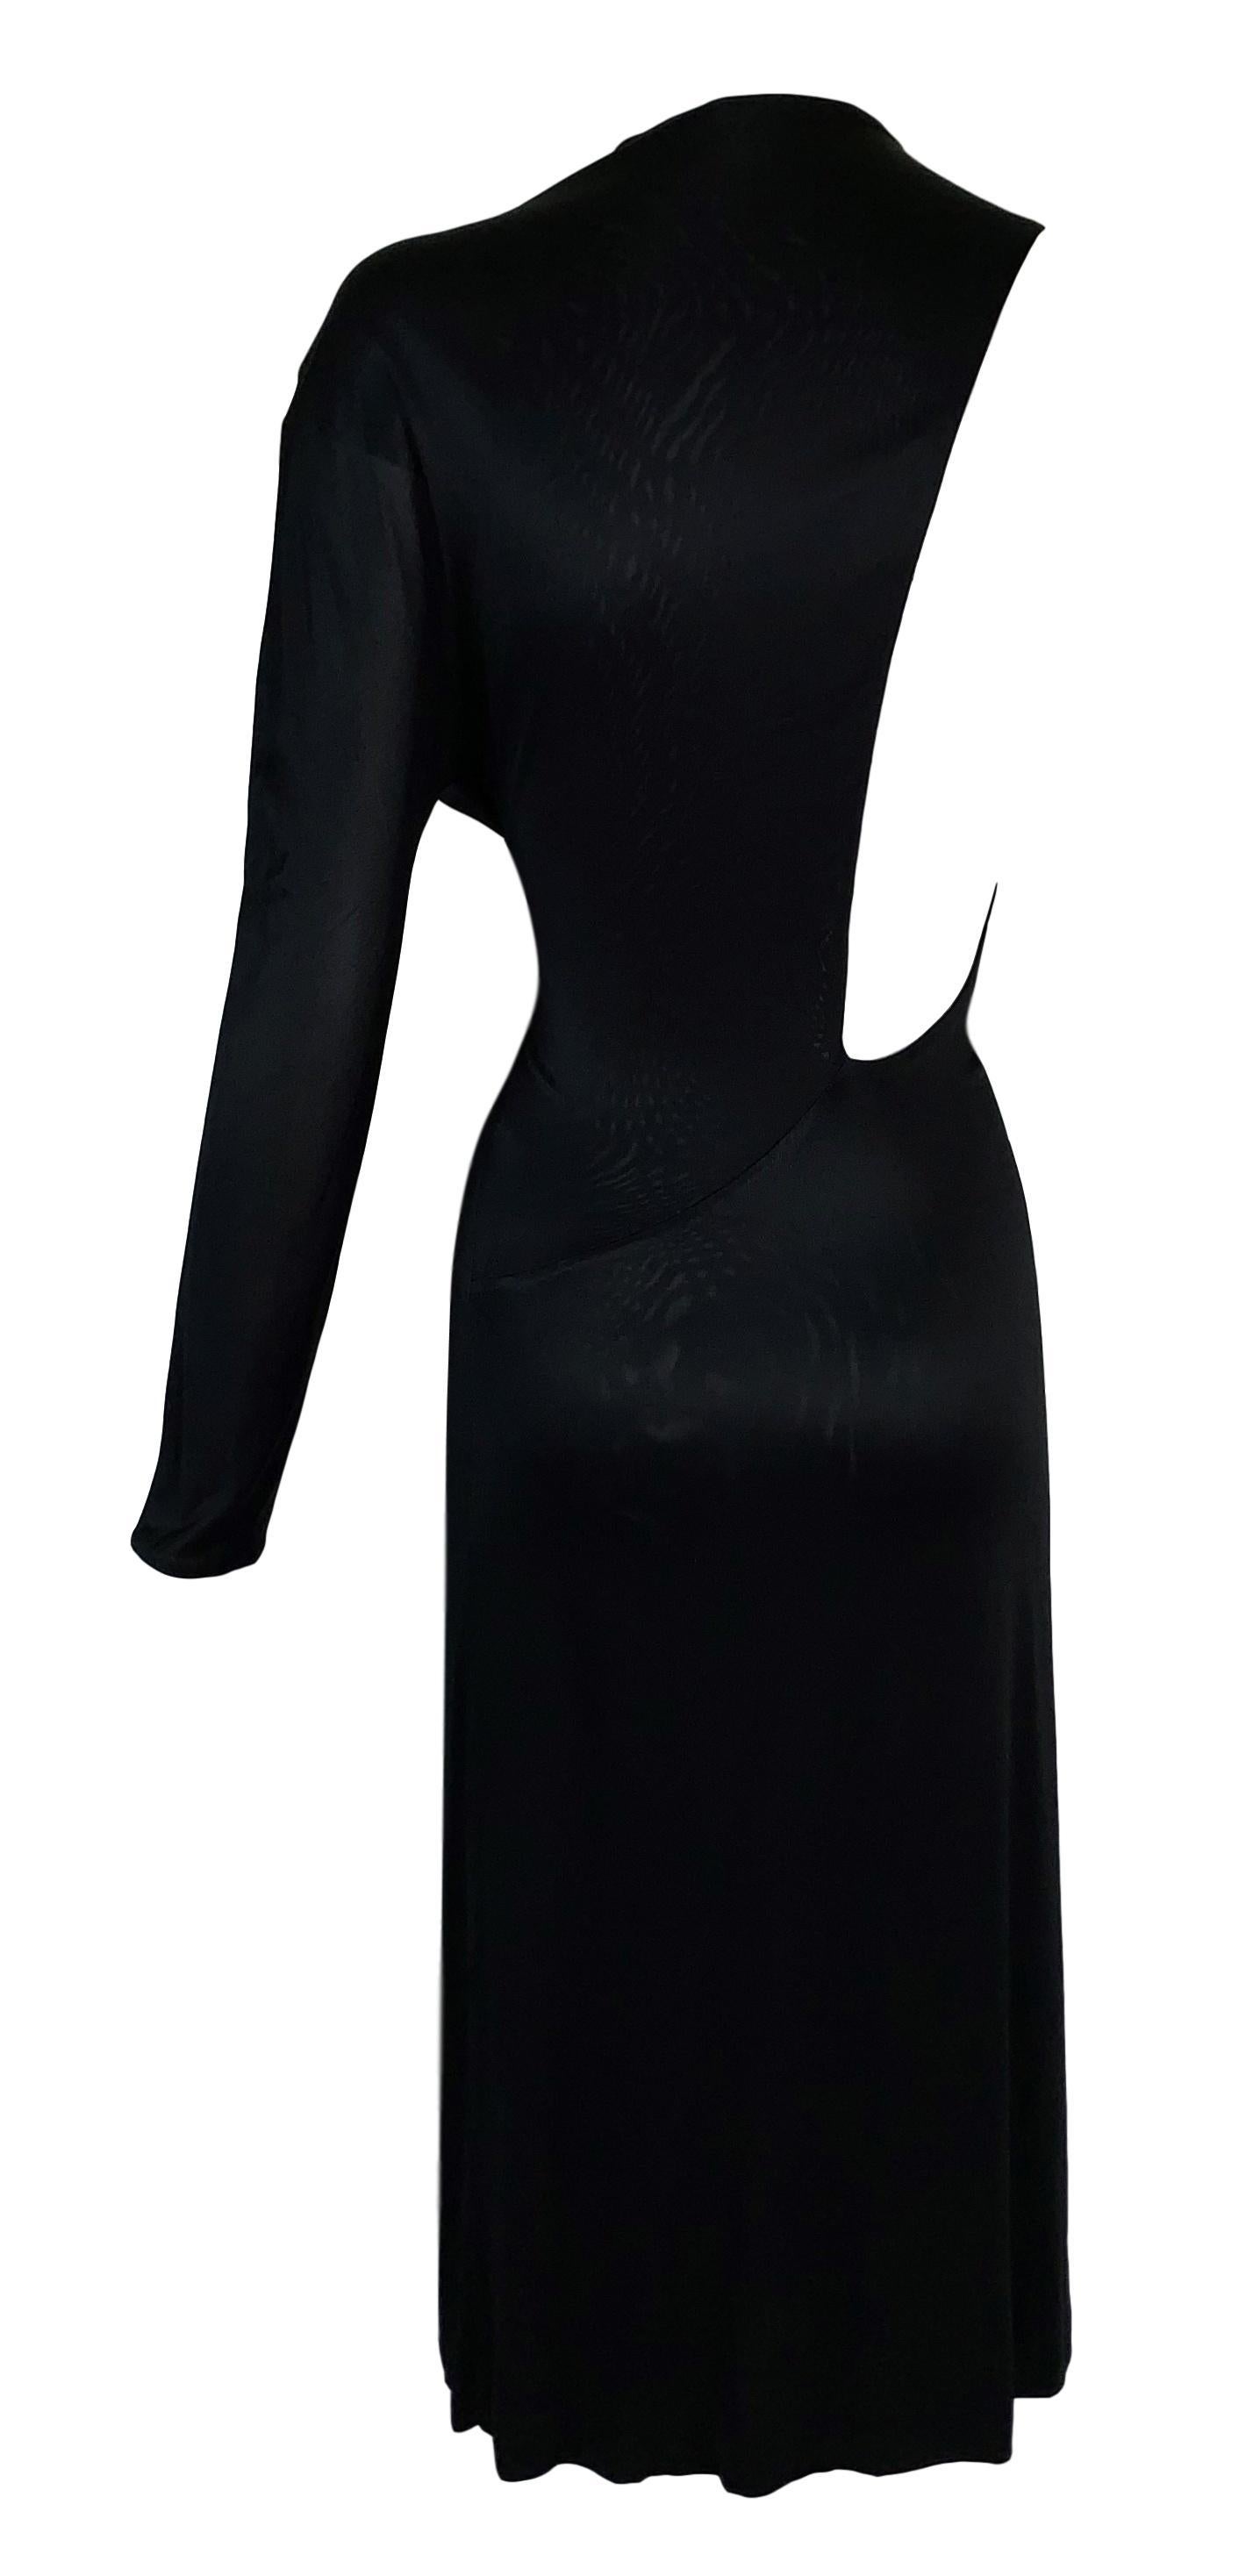 S/S 2000 Gucci Tom Ford Black One Arm Plunging Side & Back Slinky Dress In Good Condition In Yukon, OK